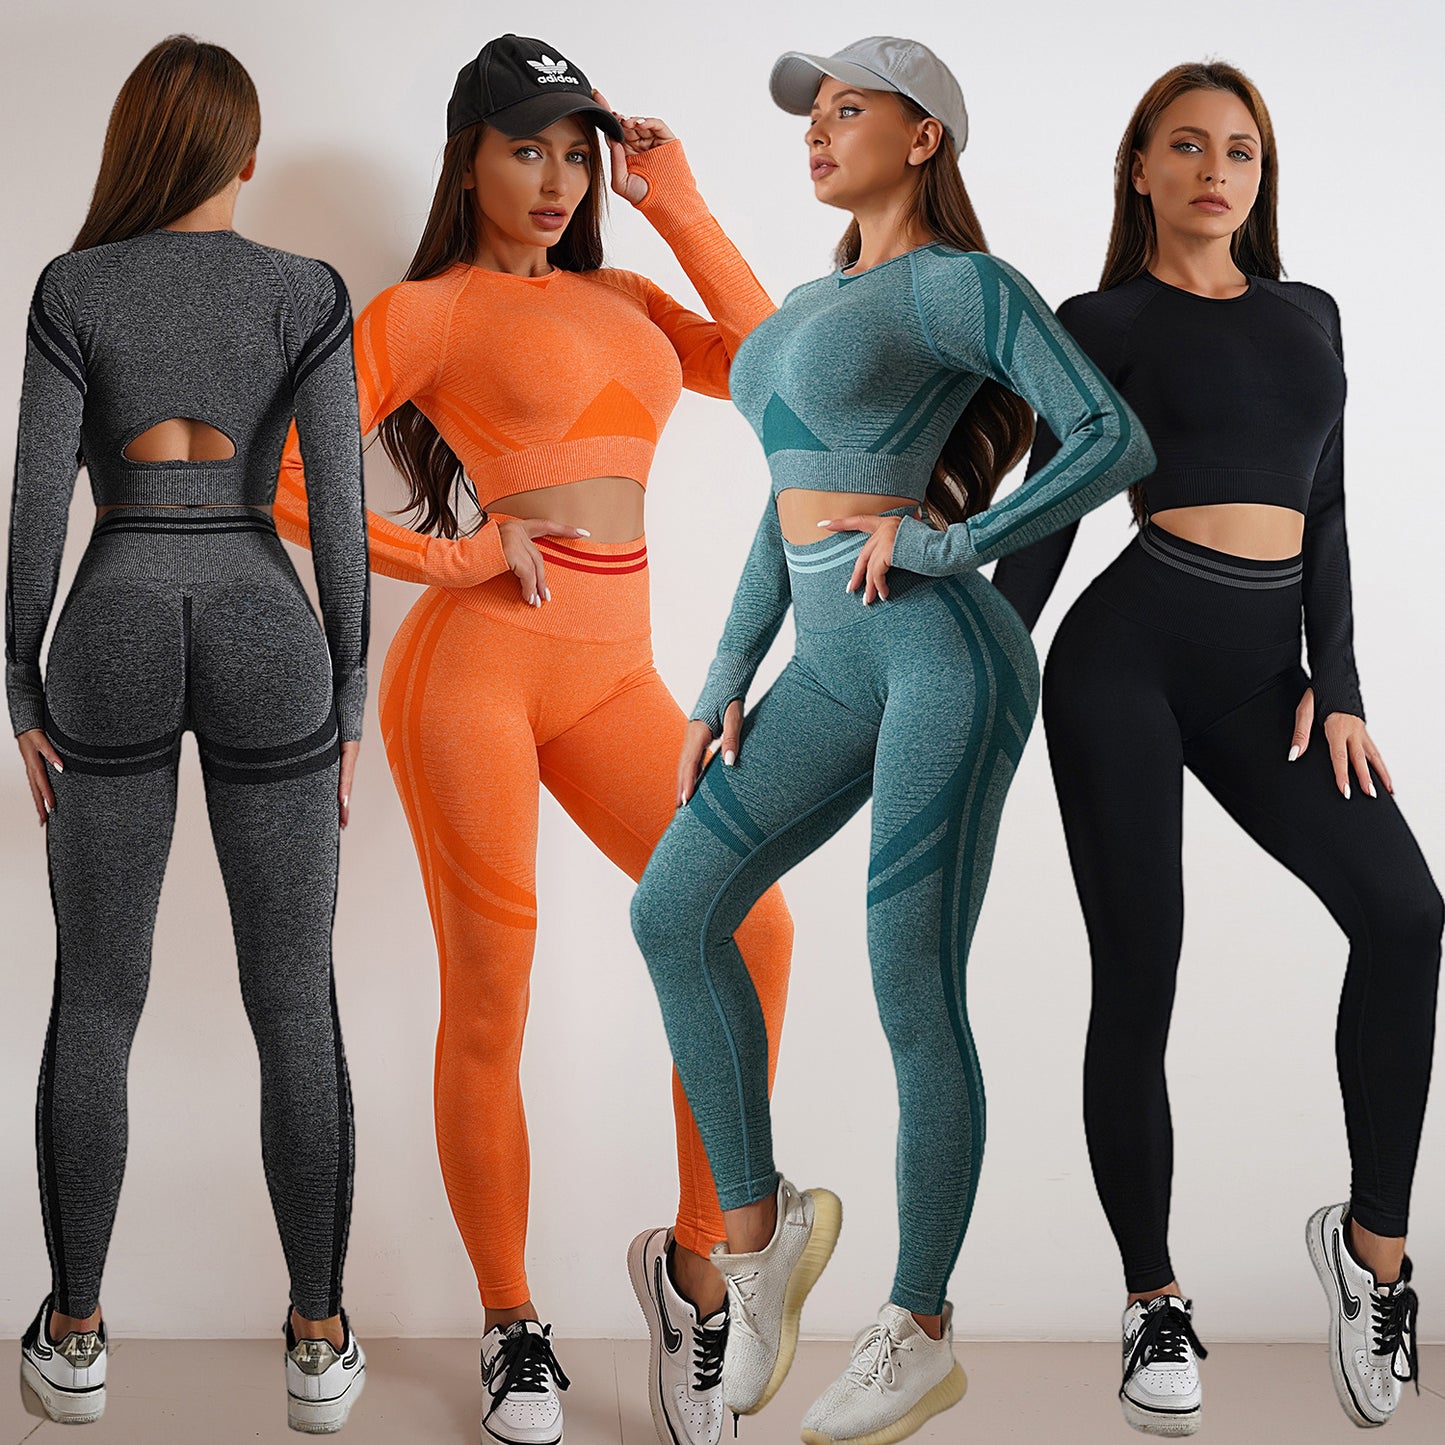 Elite Seamless Yoga Pants Sports Gym Fitness Leggings plus Long Sleeve Tops Outfits Butt Lifting Slim Workout Sportswear Clothing